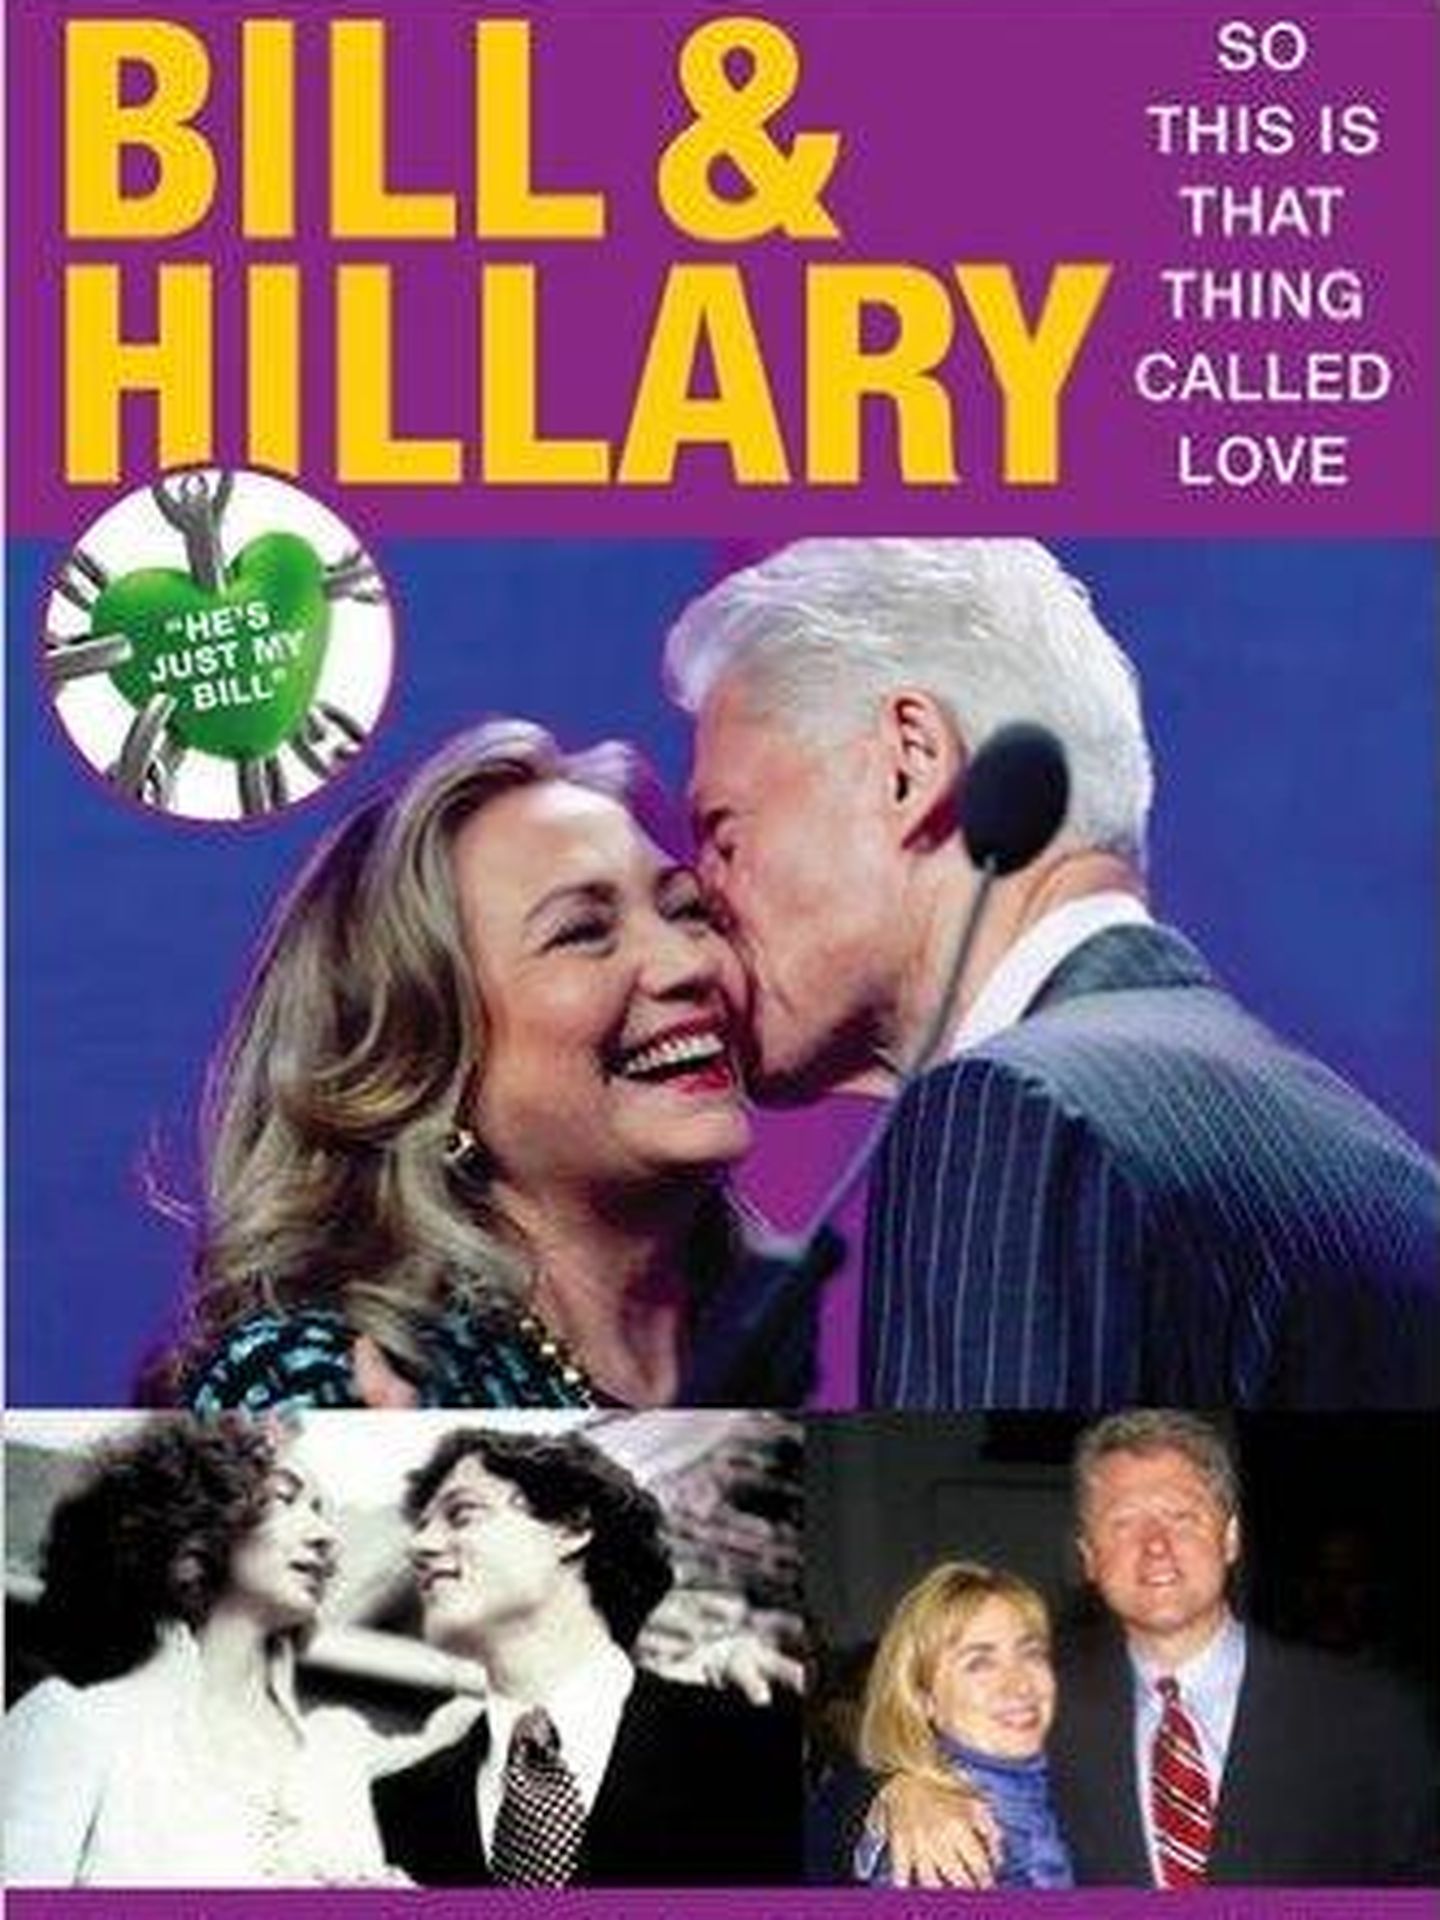 Portada del libro 'Bill and Hillary: So This Is That Thing Called Love'